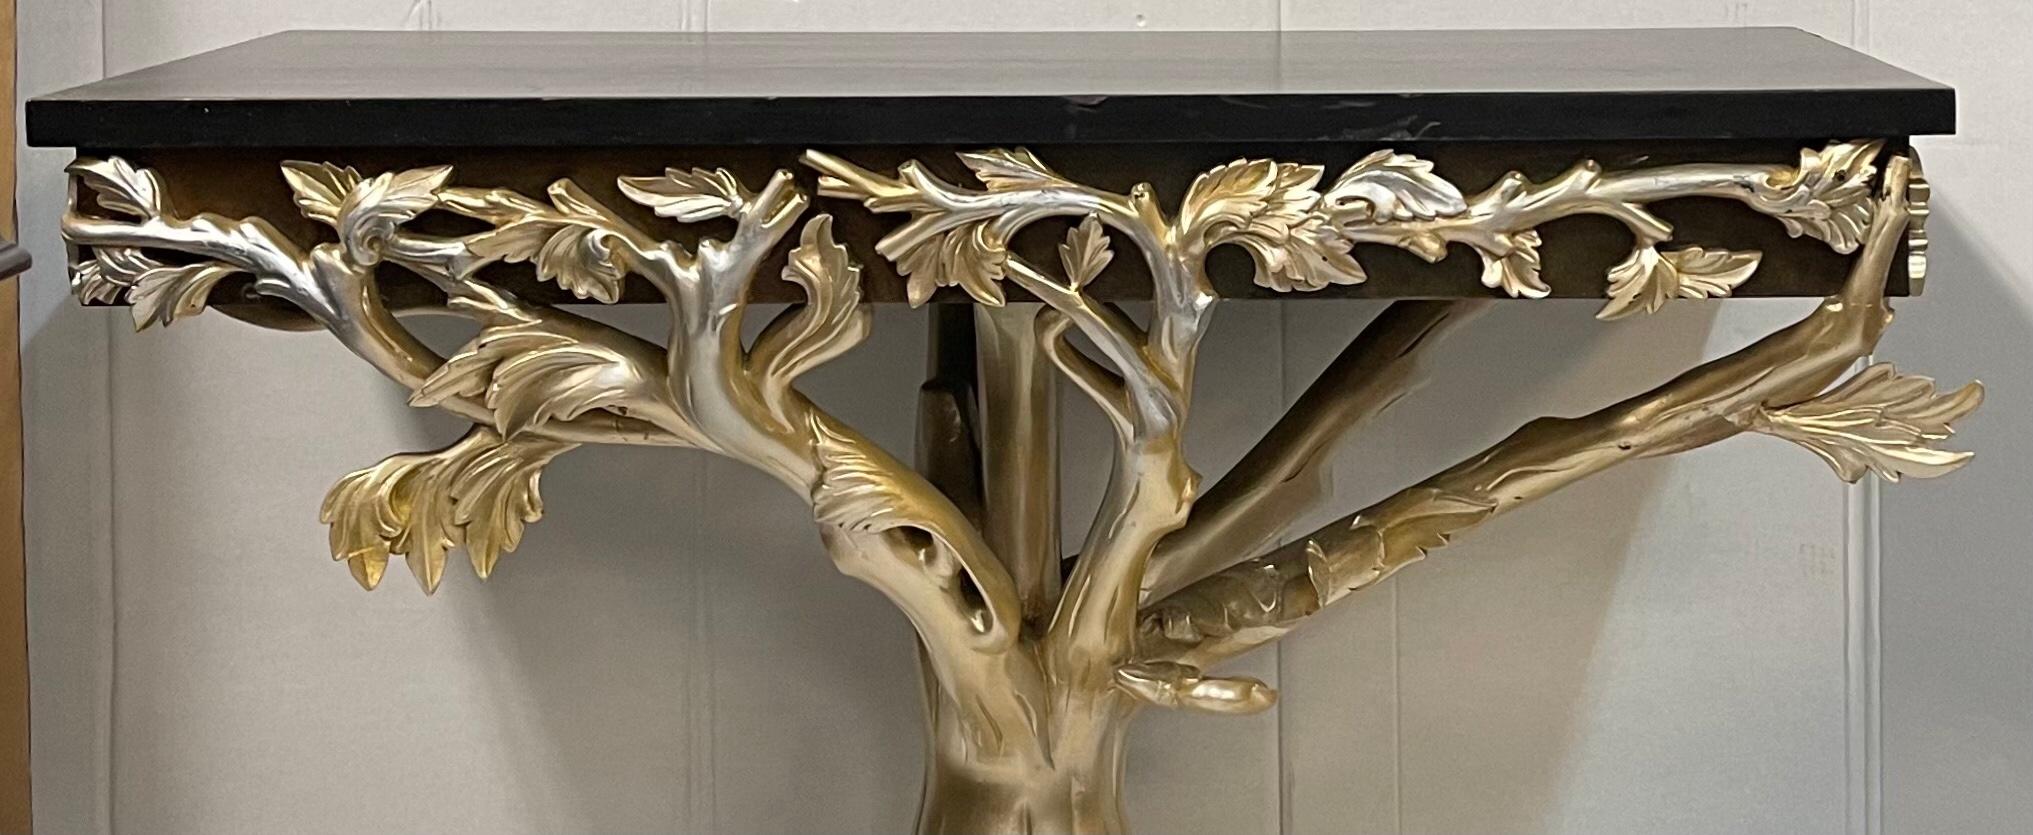 Organic Modern Late 20th-C. J. Robert Scott Carved Silver Giltwood Faux Bois Console Table